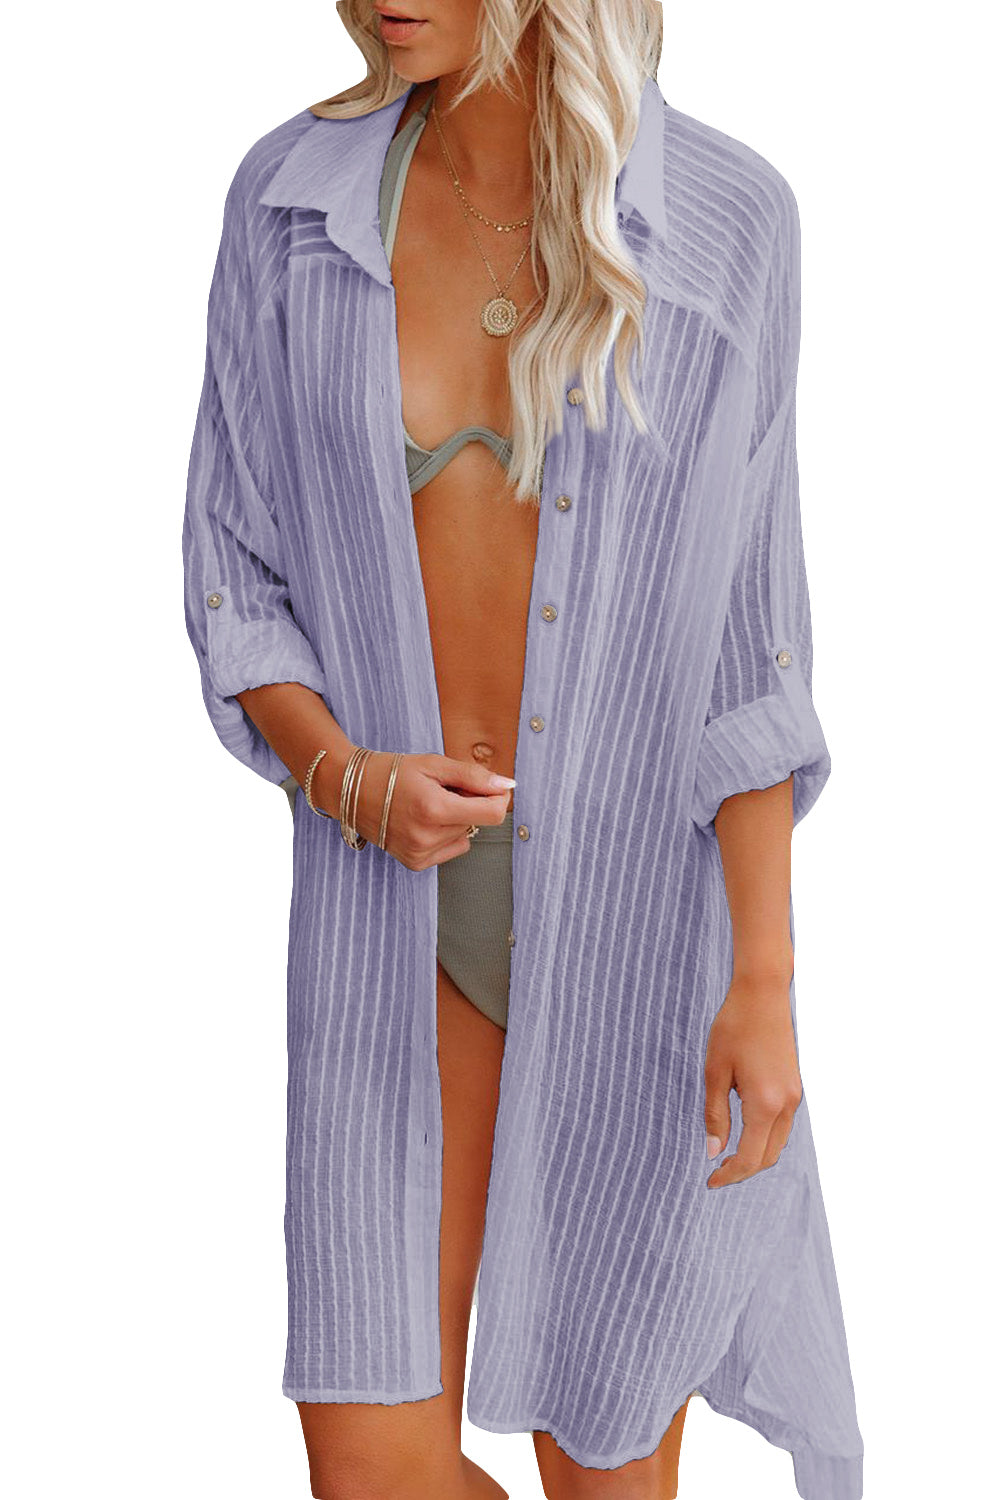 LC42994-8-S, LC42994-8-M, LC42994-8-L, LC42994-8-XL, Purple Casual Long Sleeve Striped Shirt Dress Beach Swimsuit Cover Ups with Belt